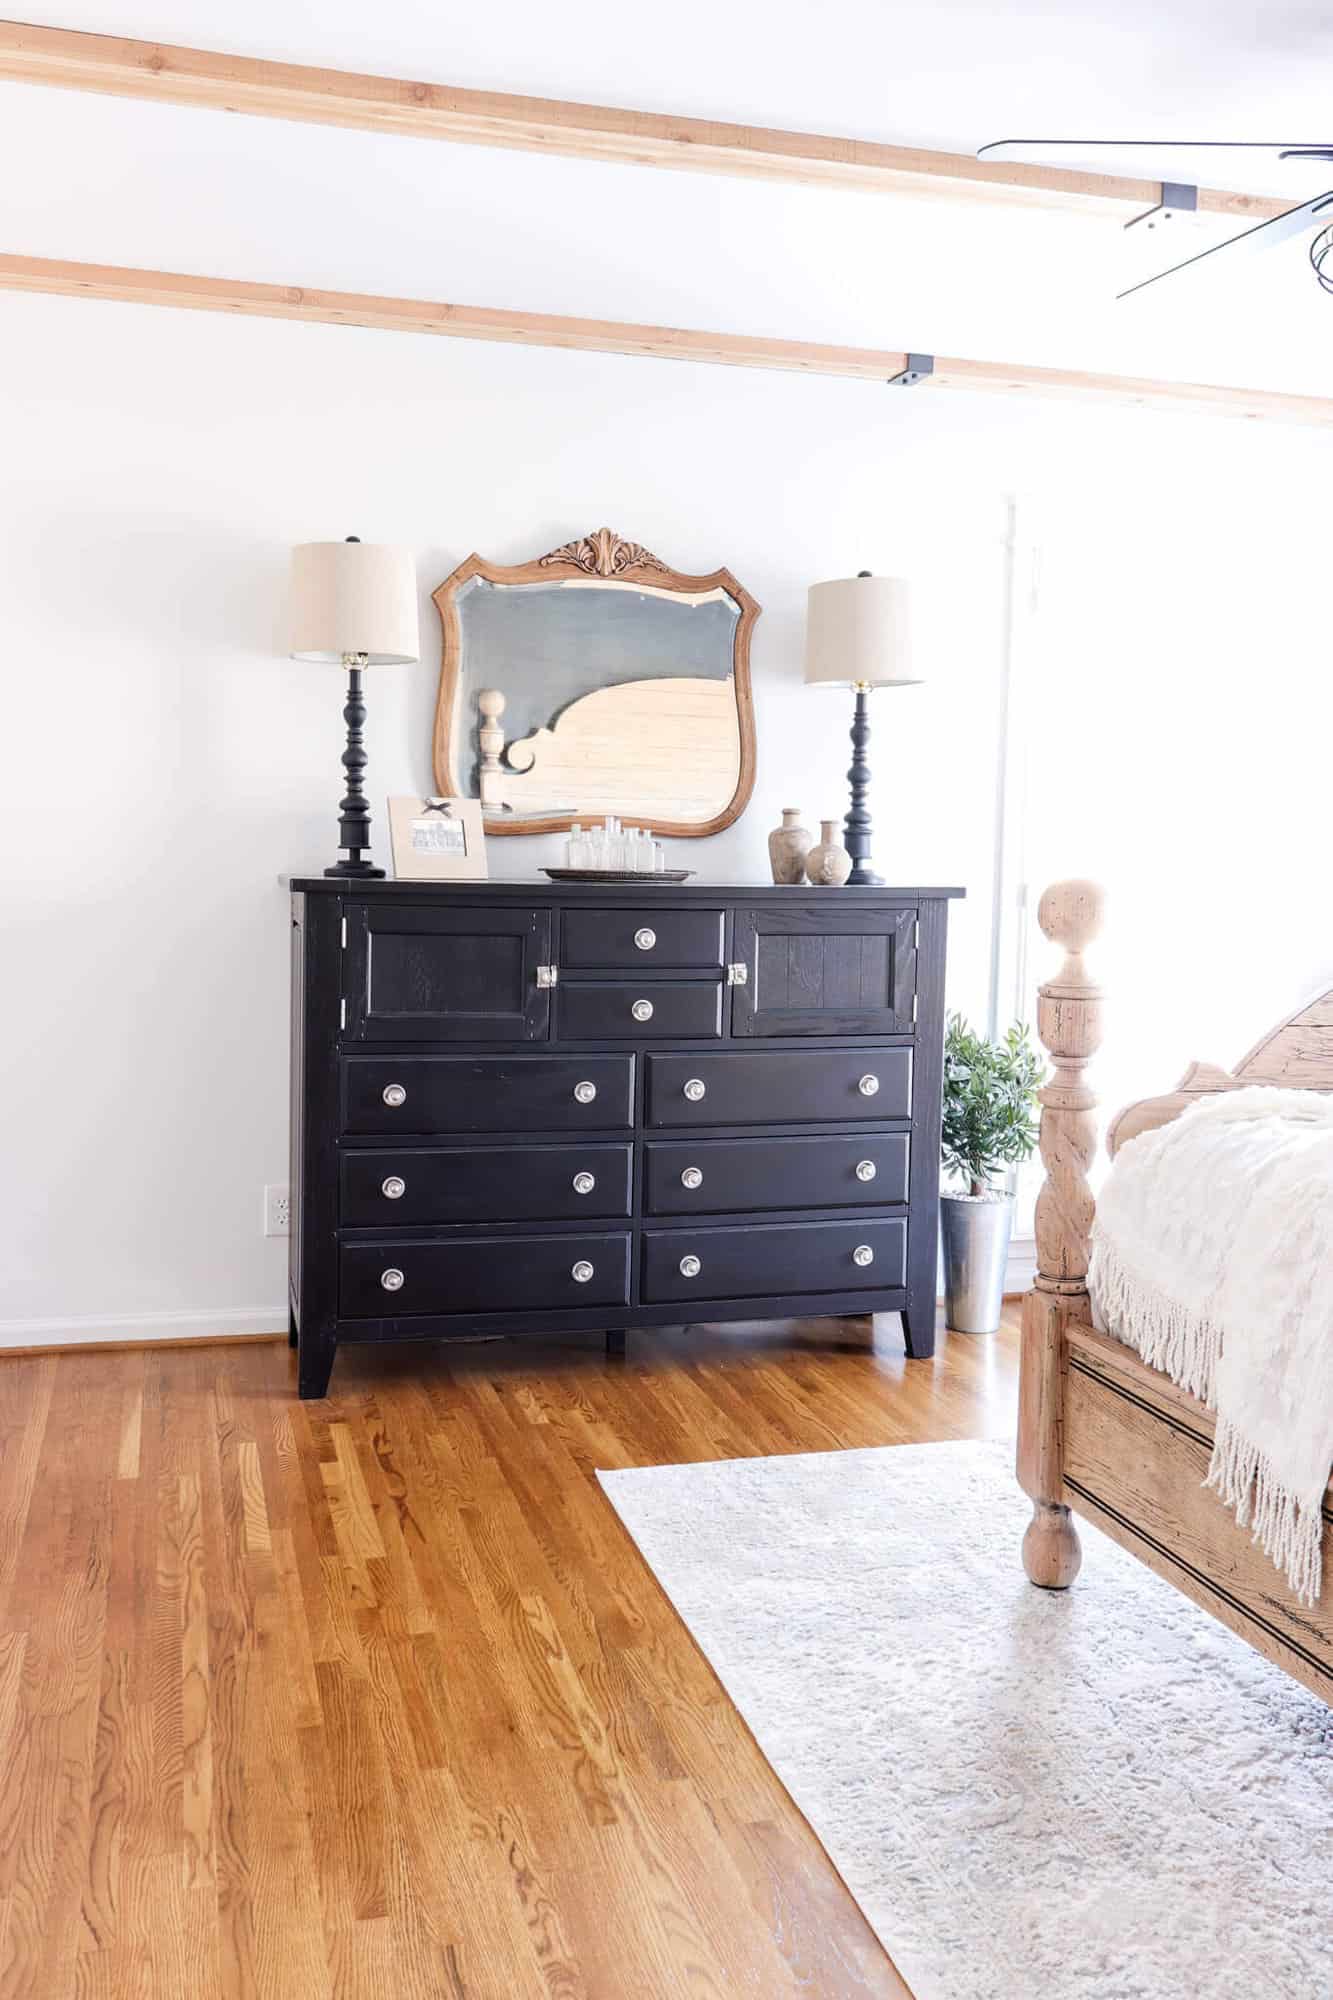 black dresser with vintage mirror against a white wall in a room with cedar beams on the ceiling